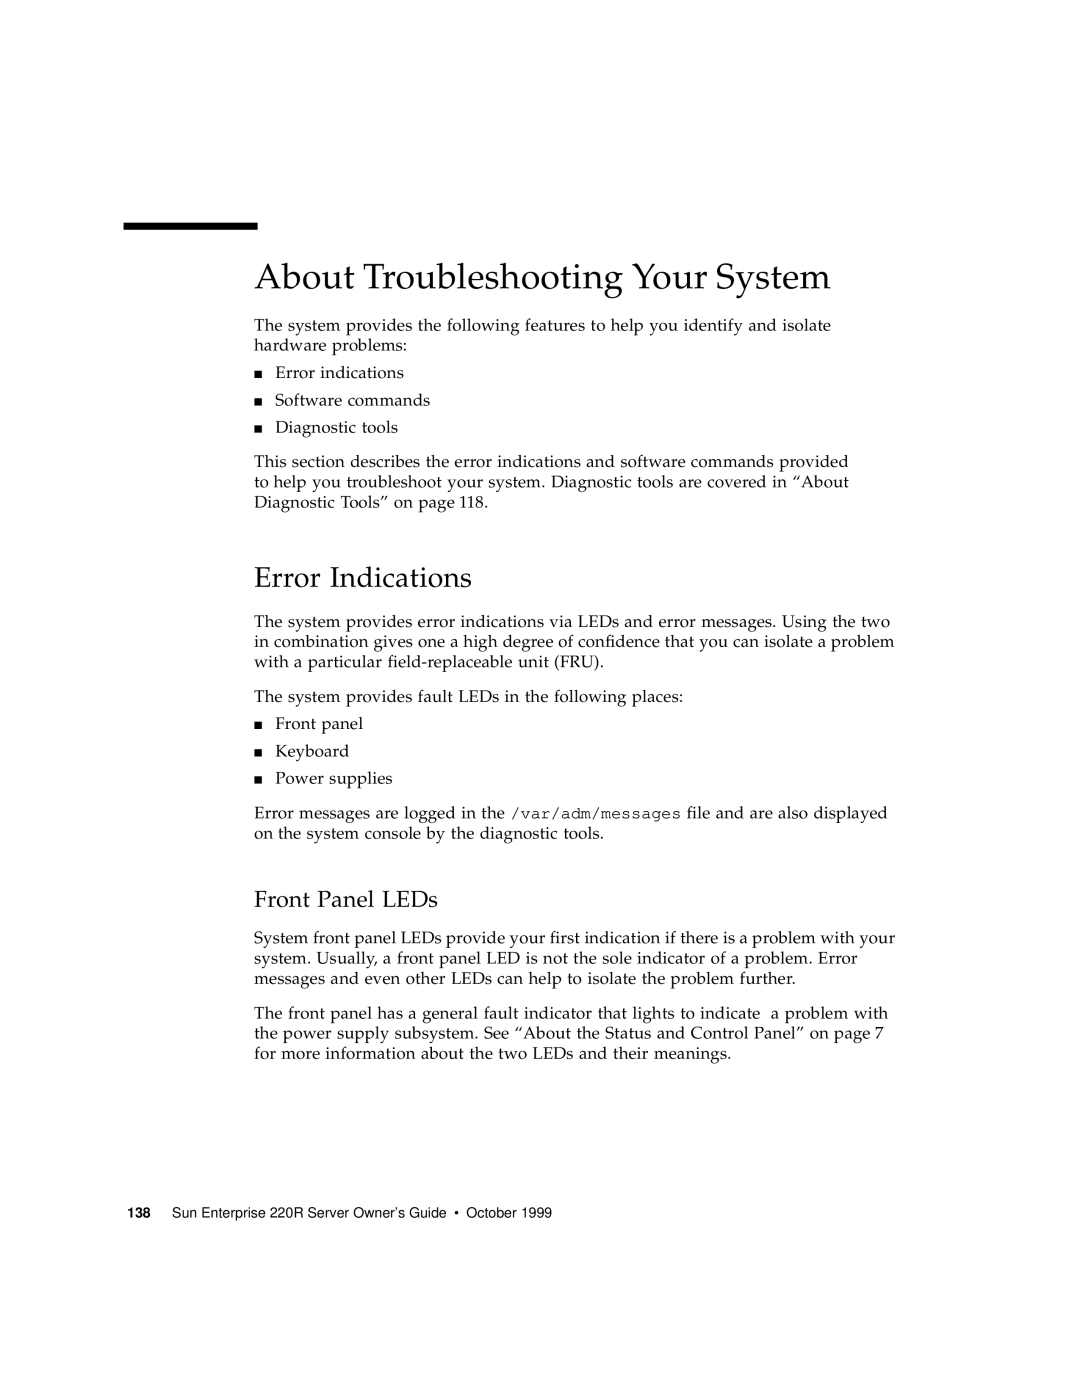 Sun Microsystems 220R manual About Troubleshooting Your System, Error Indications, Front Panel LEDs 